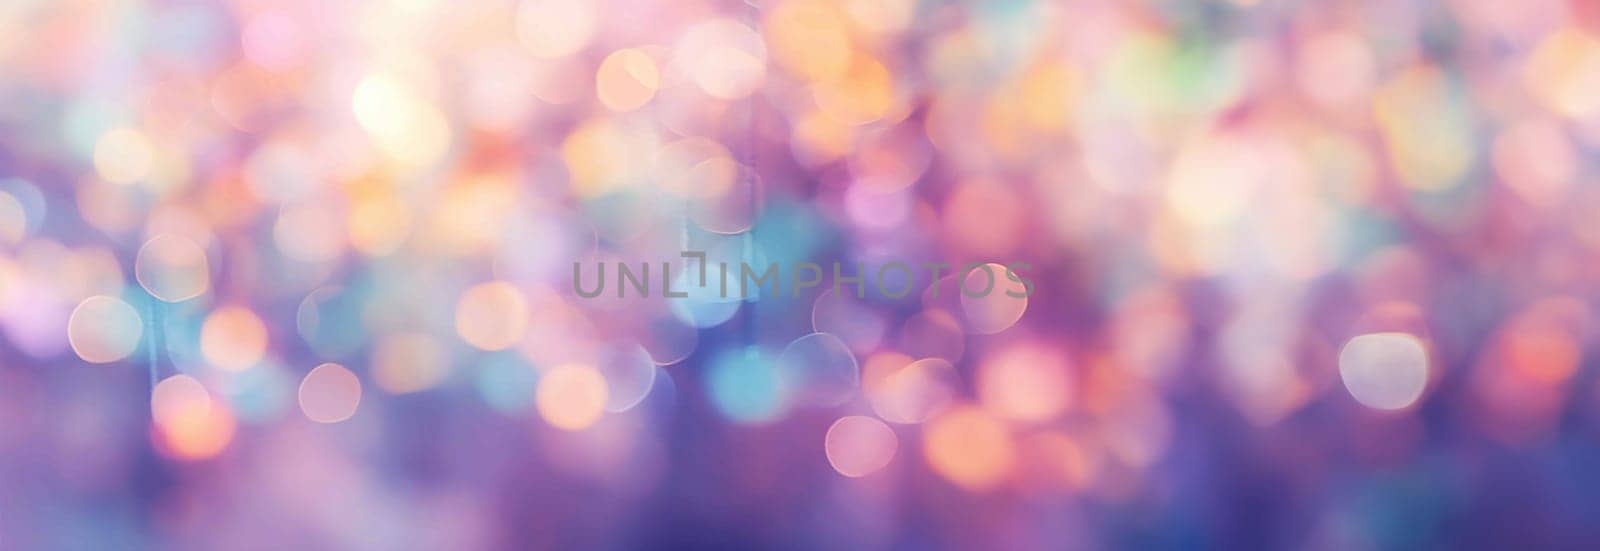 Defocused abstract bokeh background pastel colored, flare from lights, blurred round bokeh as holiday fon, celebration wallpaper. Glittering aesthetic textured pattern Purple,pink neon lights by Annebel146